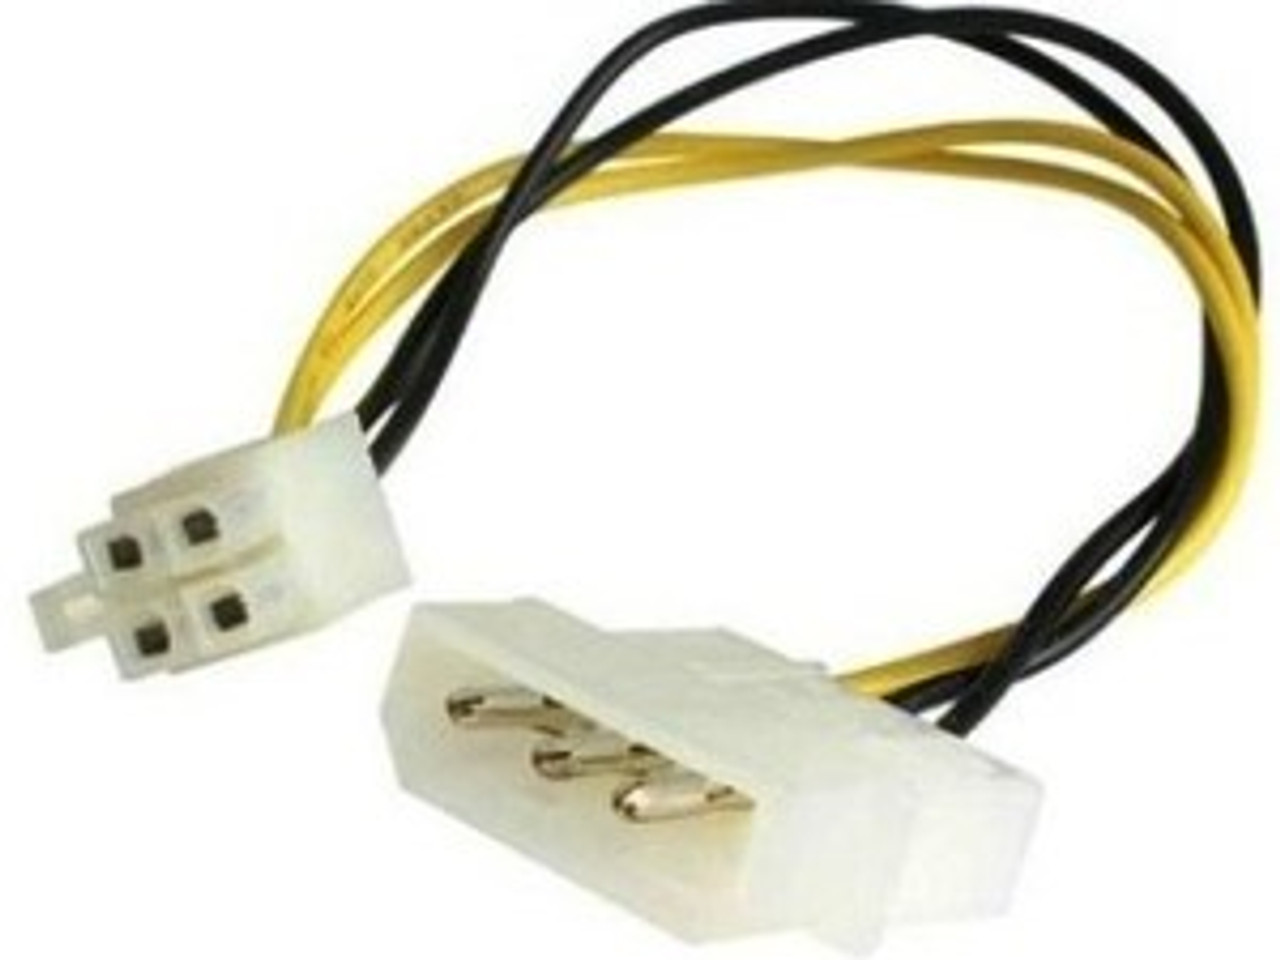 ATX Power Supply to P4 Power Adapter Cable